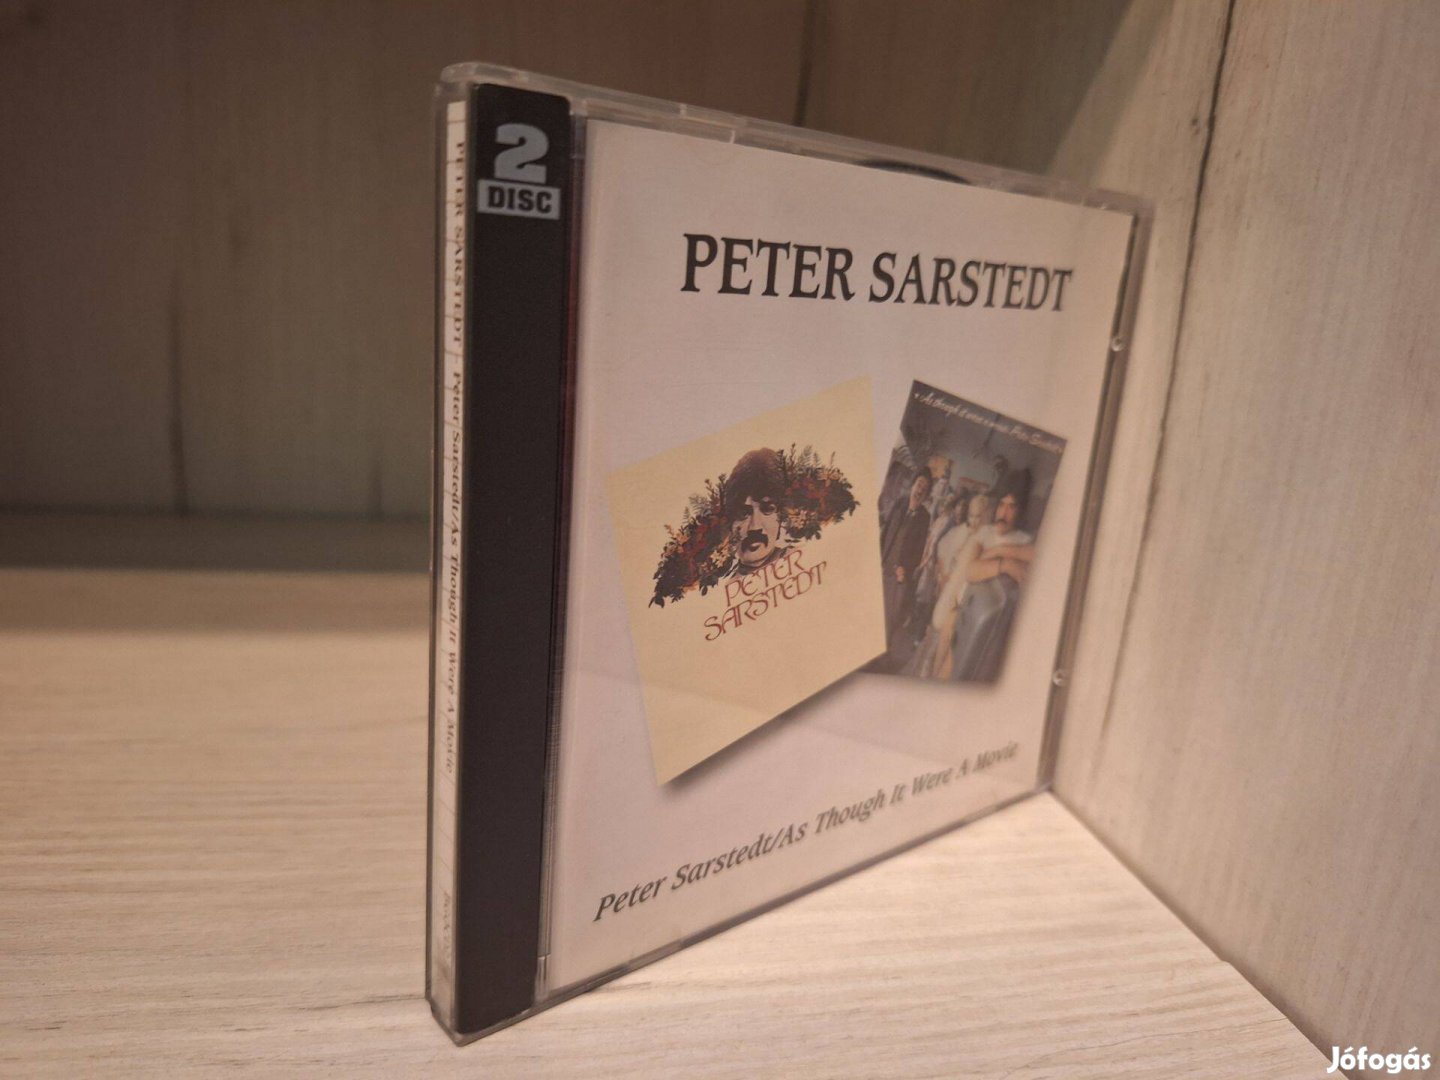 Peter Sarstedt - Peter Sarstedt / As Though It Were A Movie - dupla CD